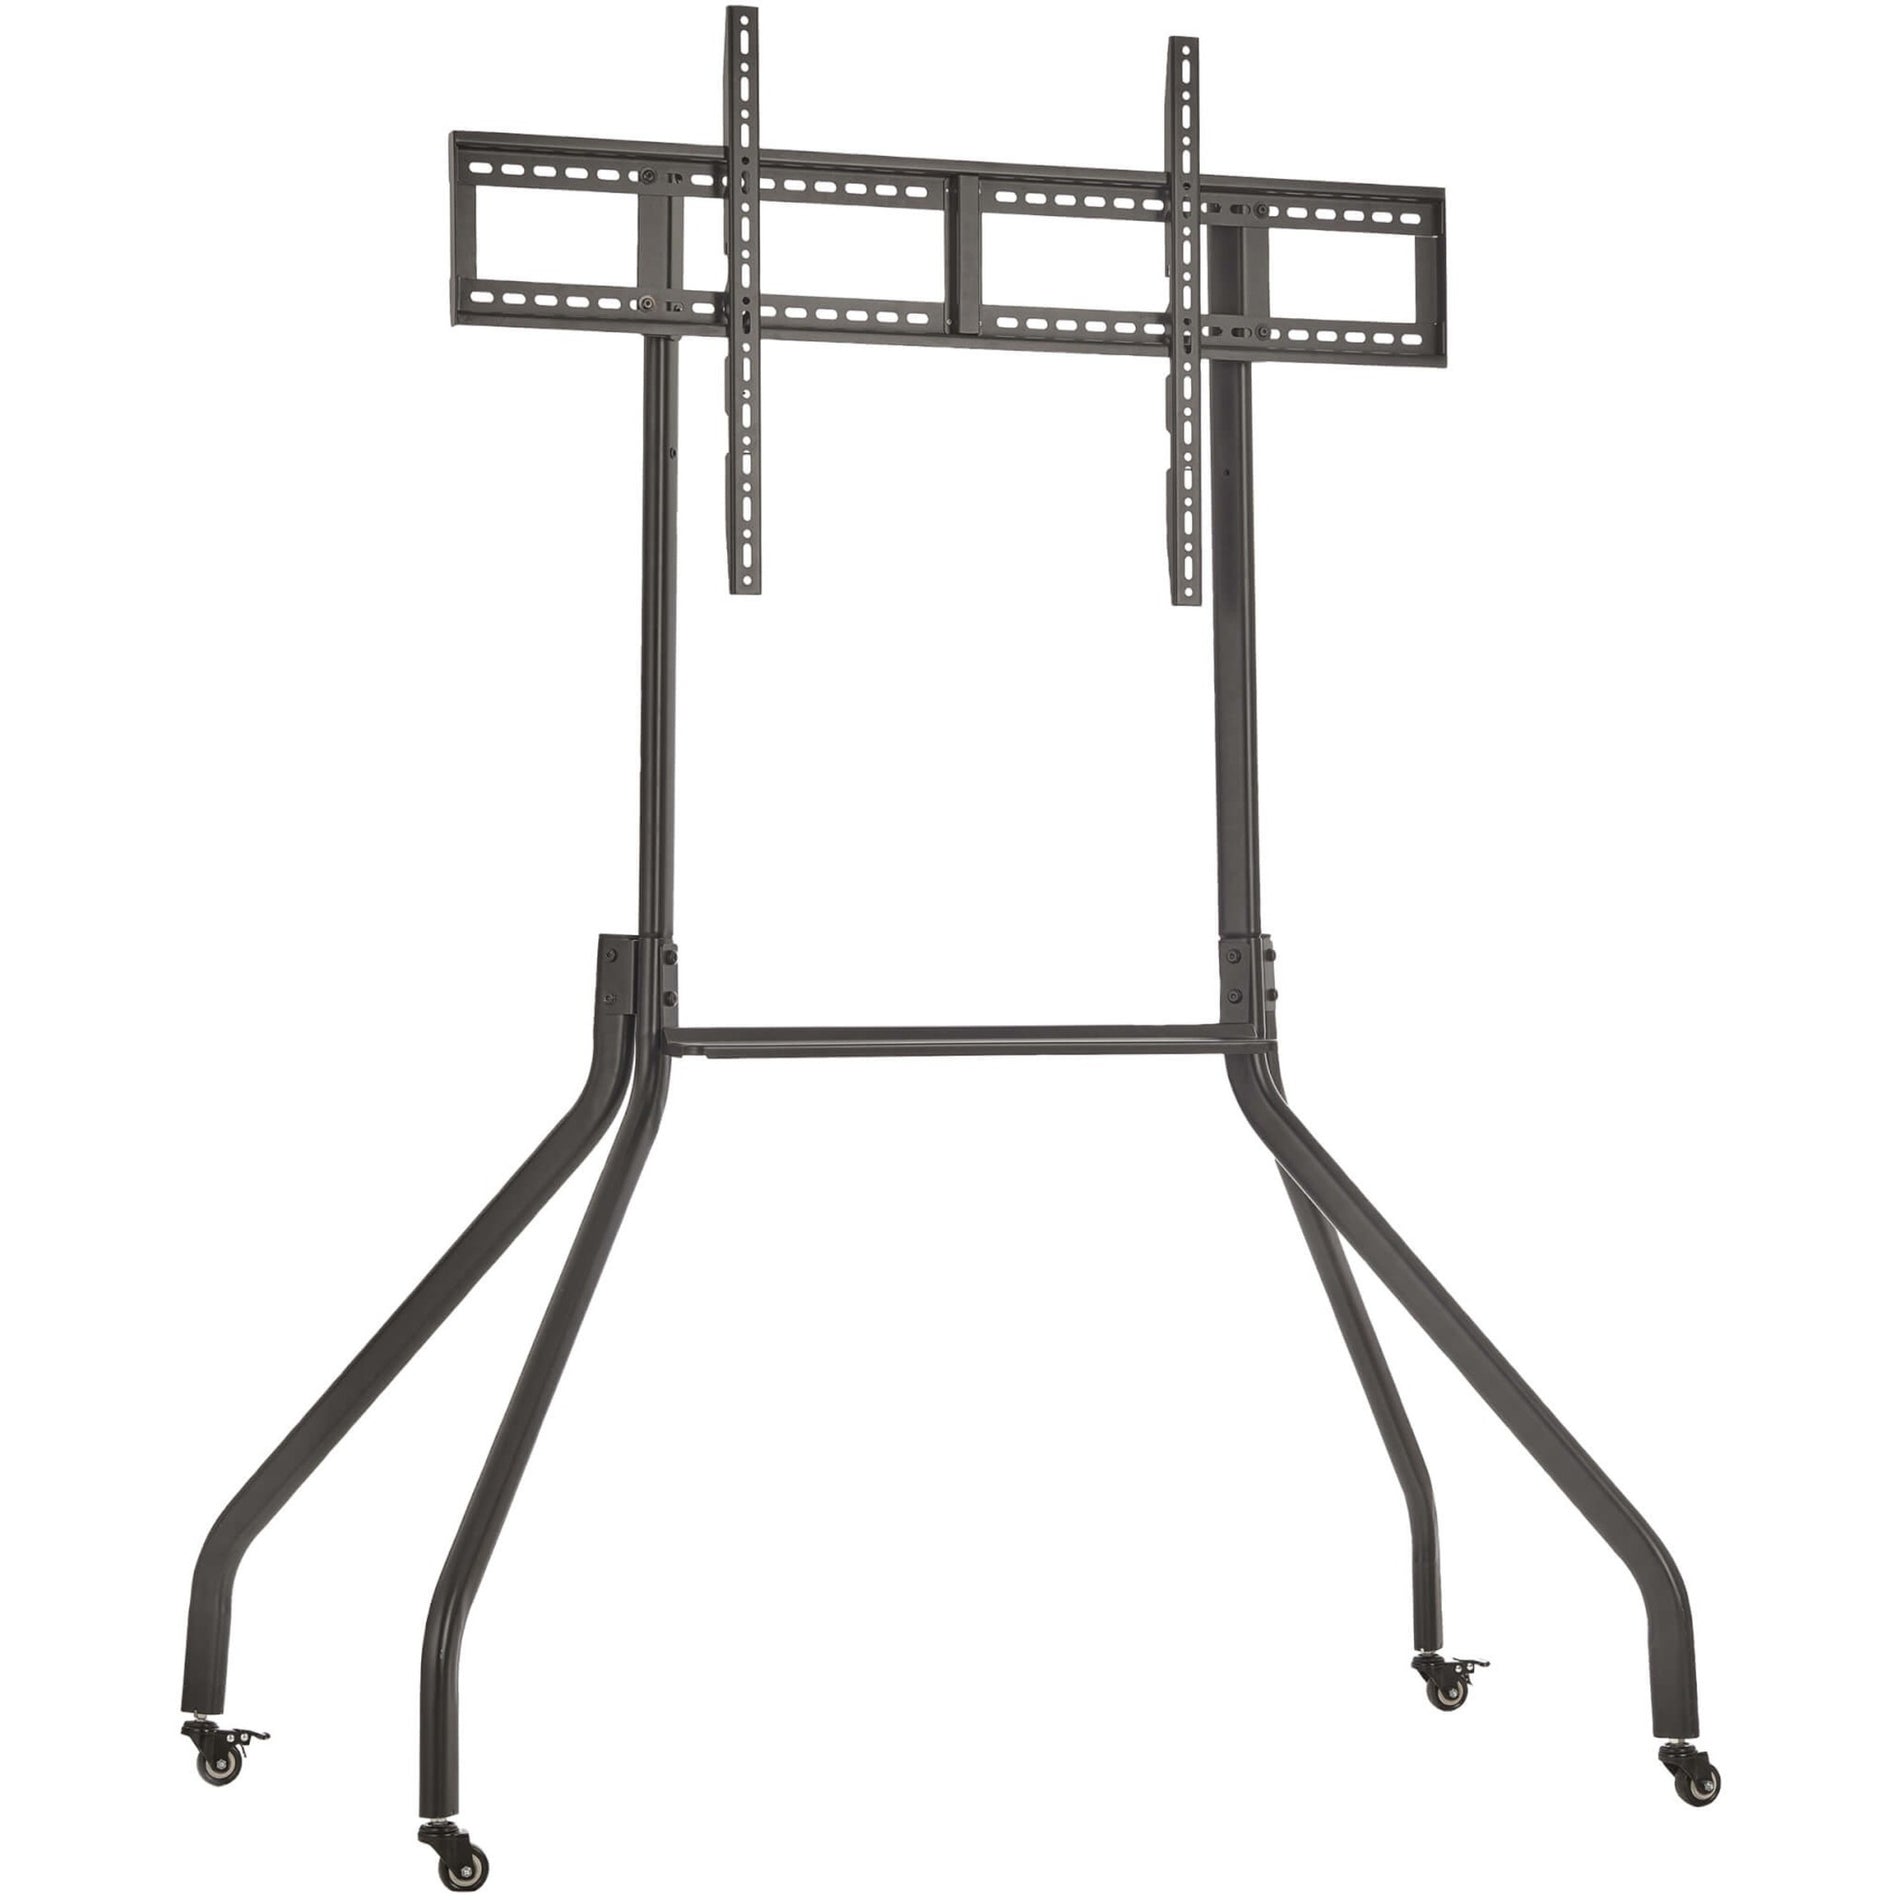 Rolling TV Cart for 55" to 85" Displays, Wide Legs, Locking Casters [Discontinued]